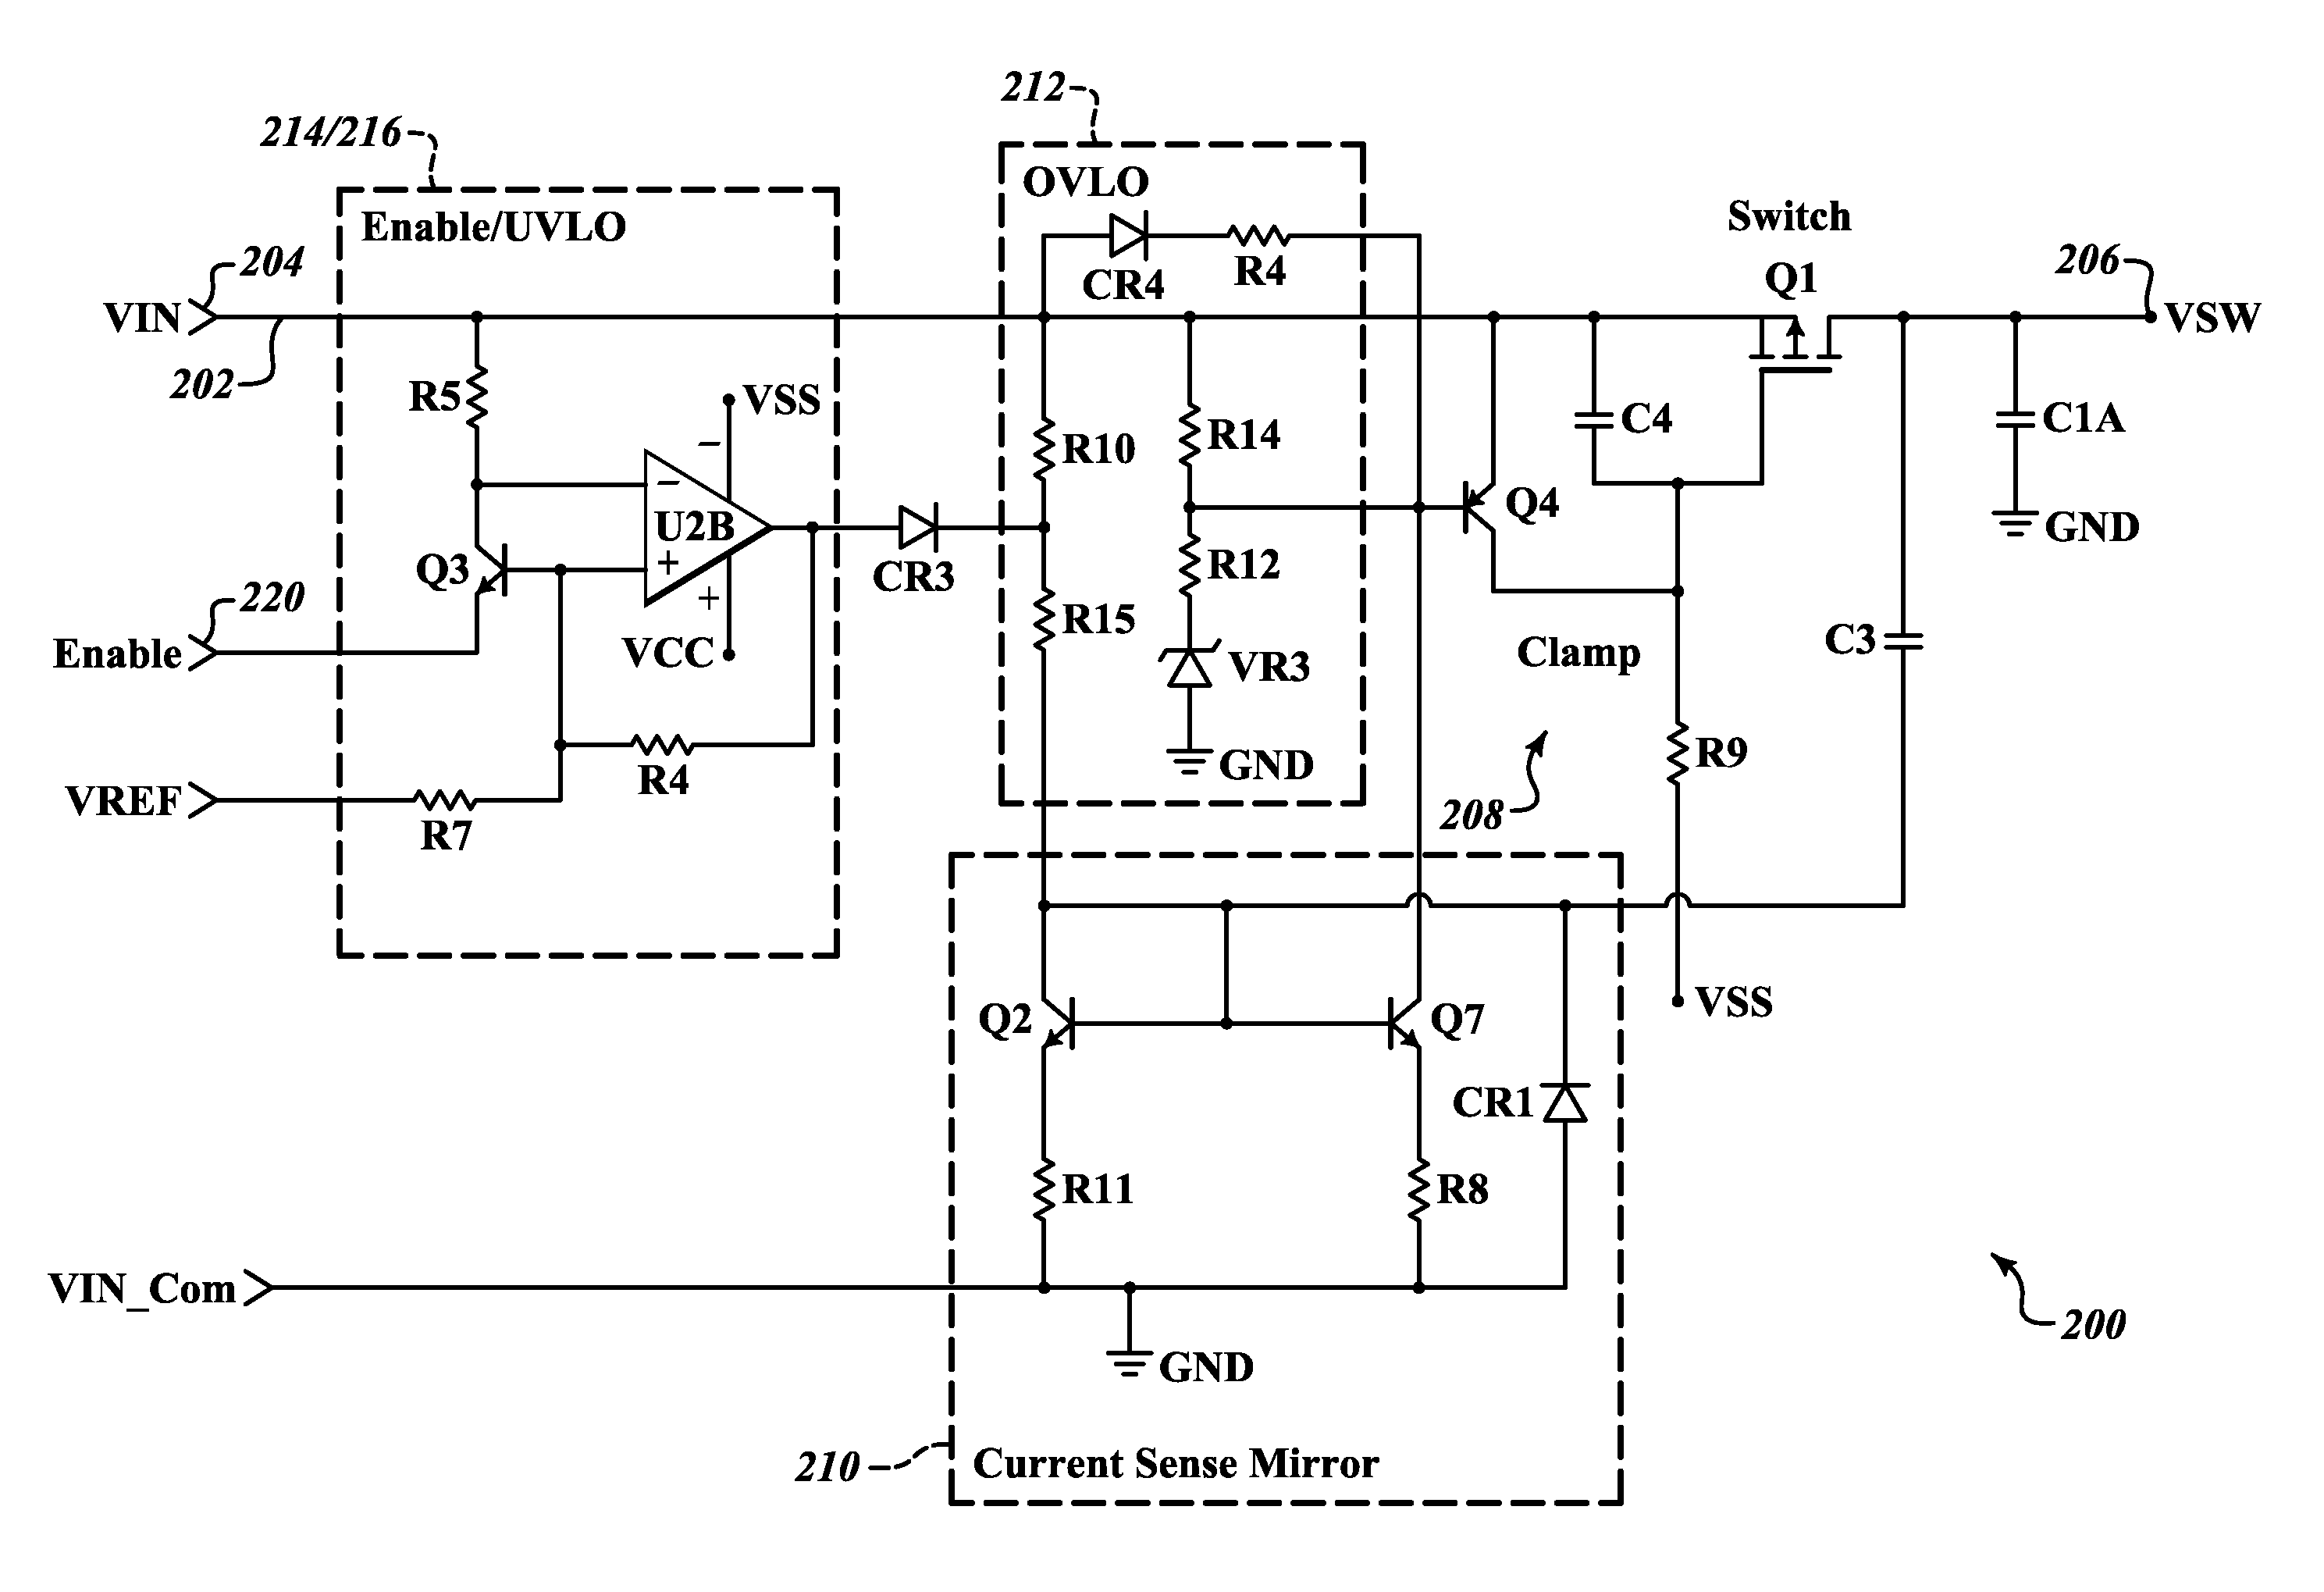 Input control apparatus and method with inrush current, under and over voltage handling